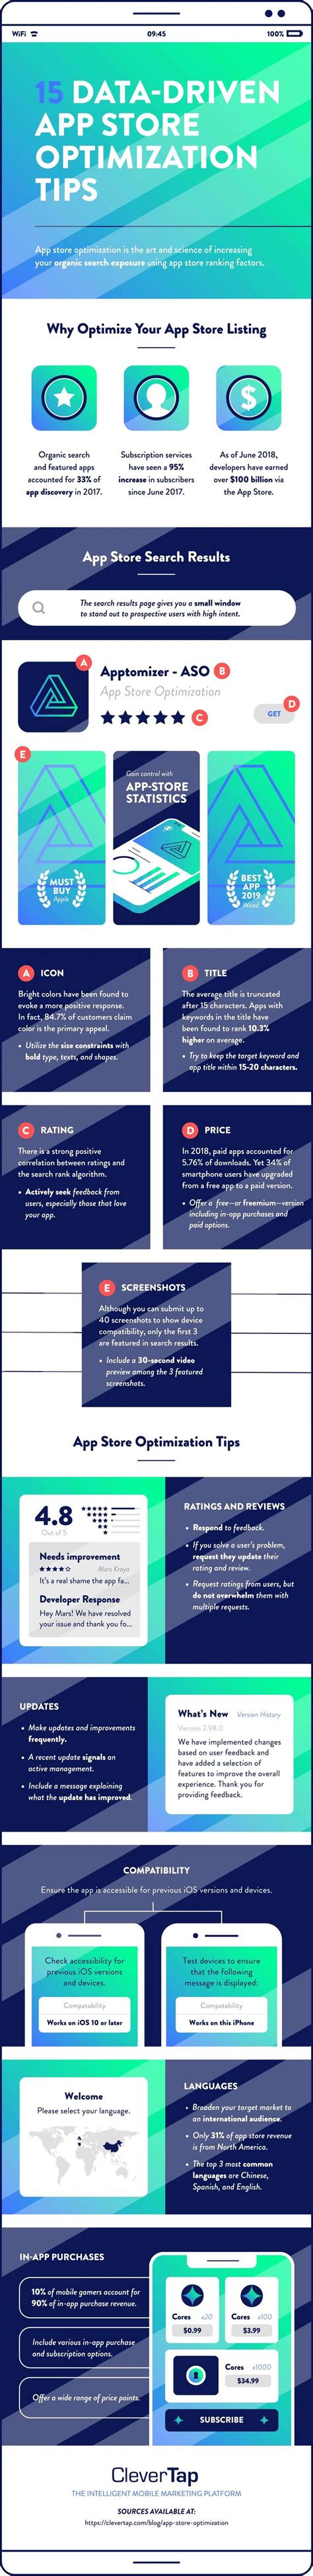 Aso is the process of optimization of your mobile app with the intent to achieve a higher ranking in the app store search results and top charts rankings. app store optimization tips infographic with examples ...